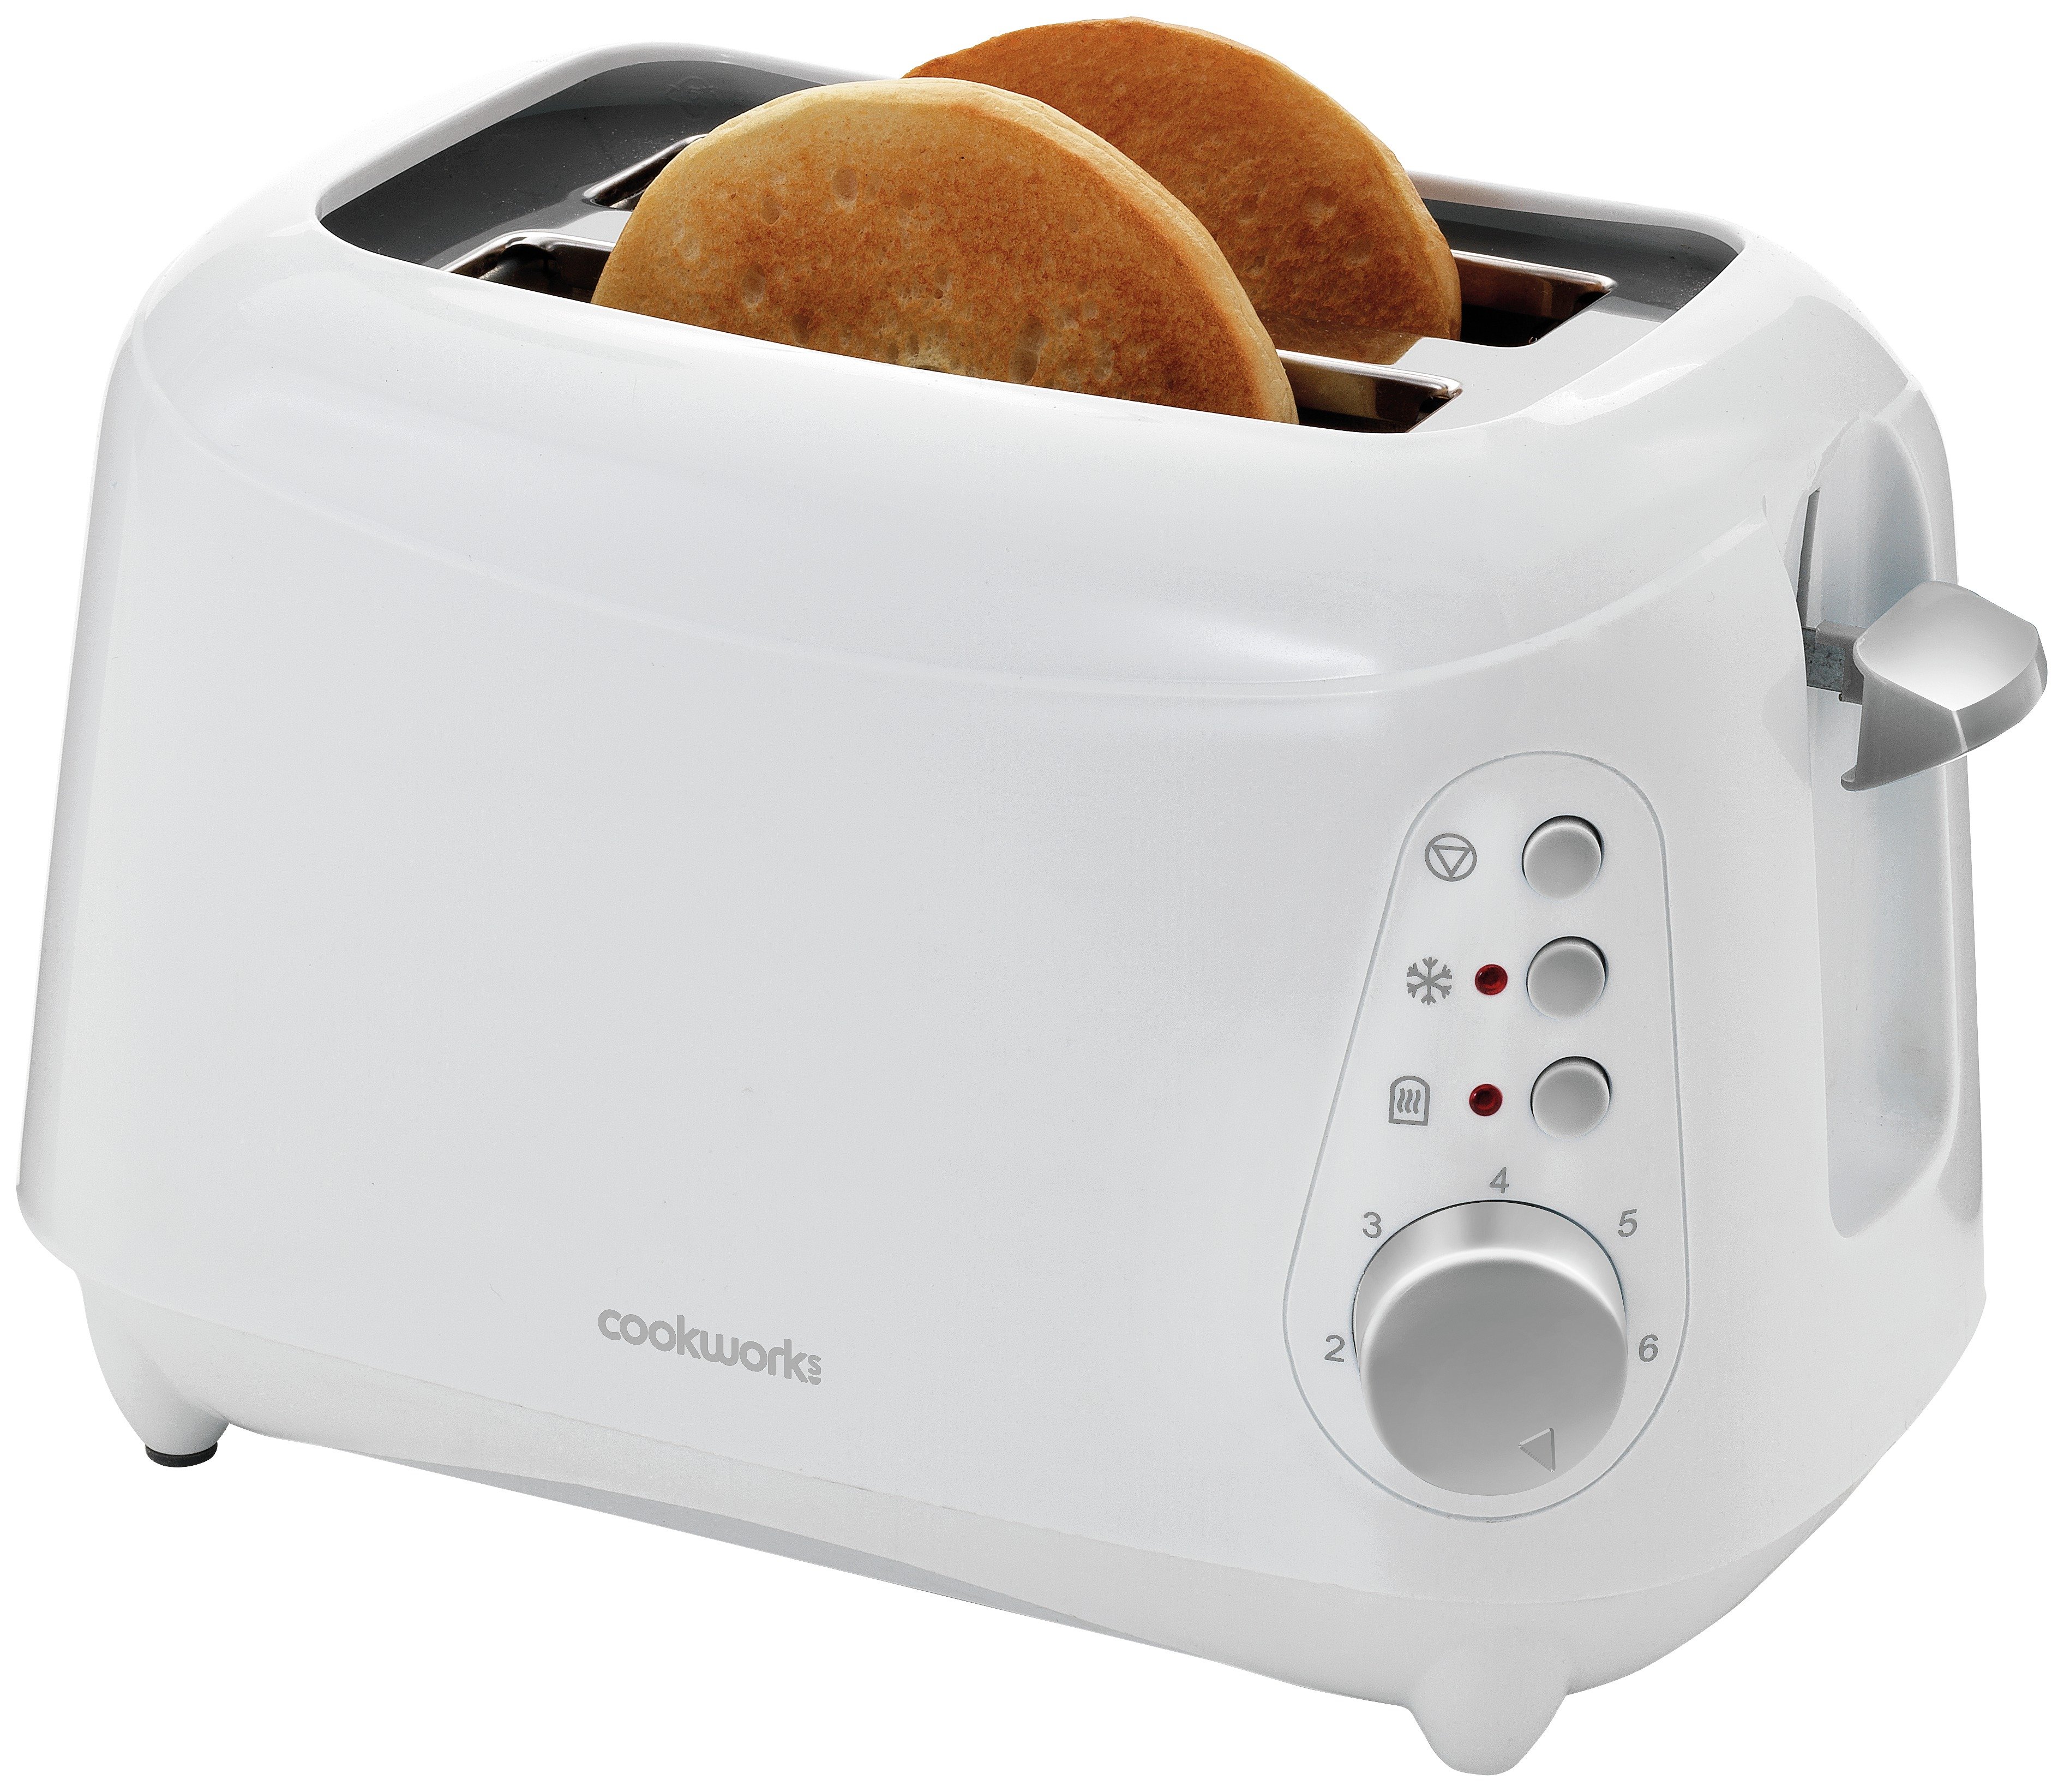 Cookworks 2 Slice Toaster 900 Watts review